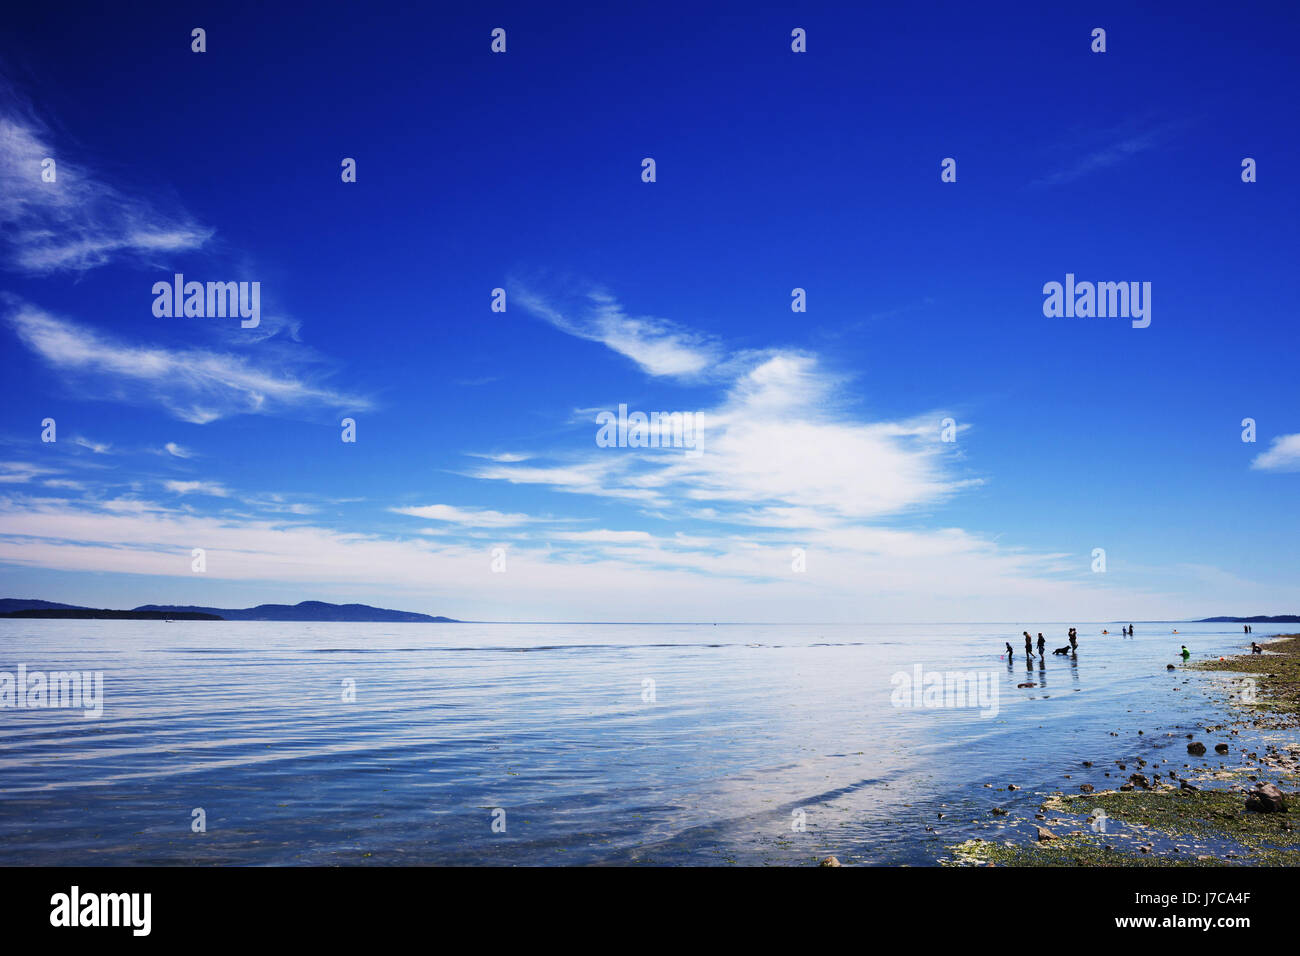 People playing in ocean, Island View Beach.  Victoria BC Canada Stock Photo